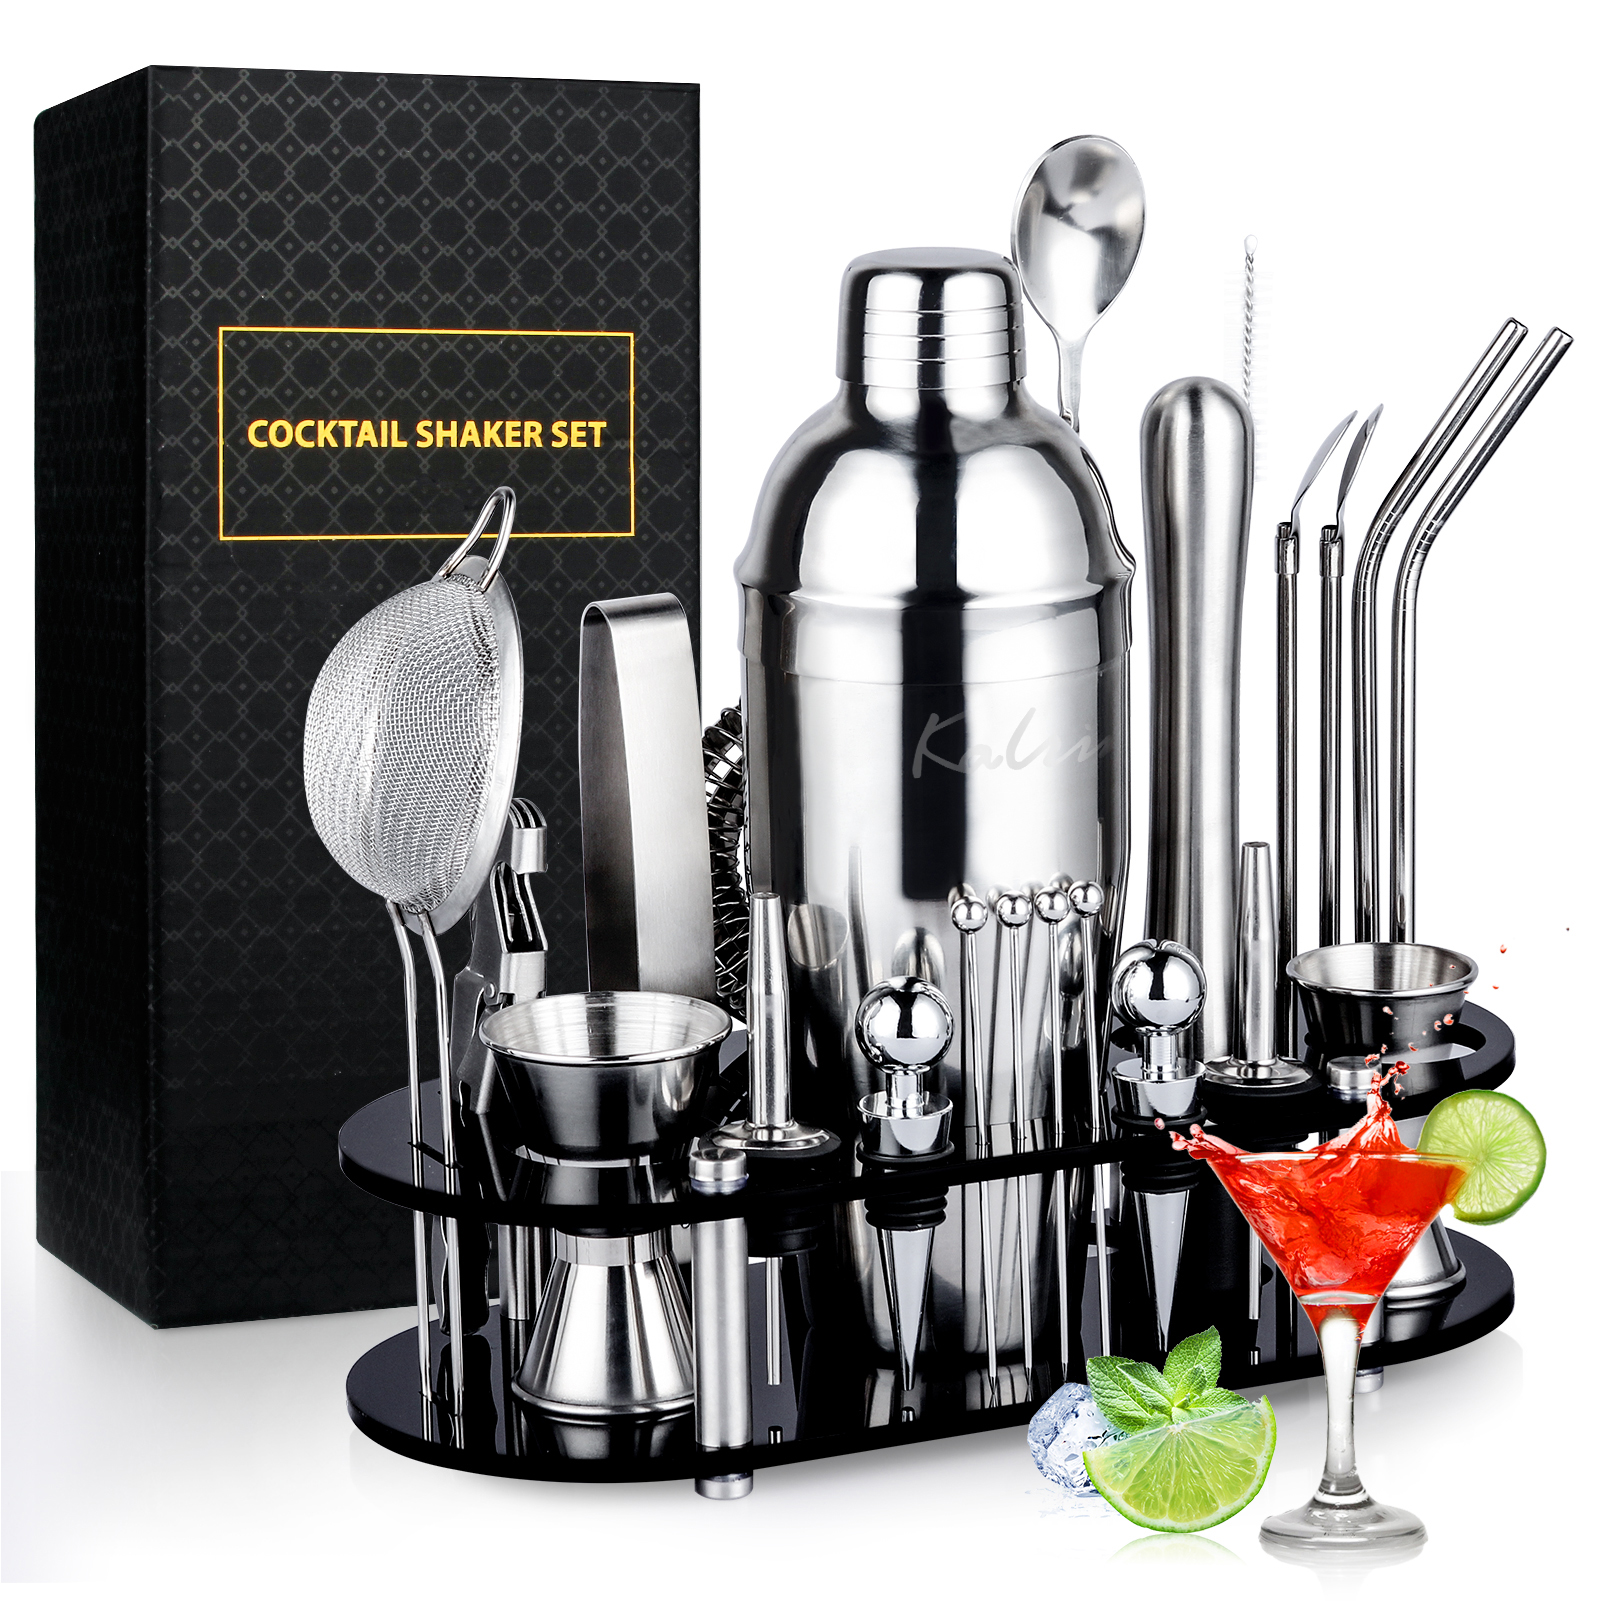 Kalrin Bartender Kit, 25-Piece Cocktail Shaker Set Stainless Steel Bar Tools with Acrylic Stand, Full Bartender Accessories - image 1 of 9